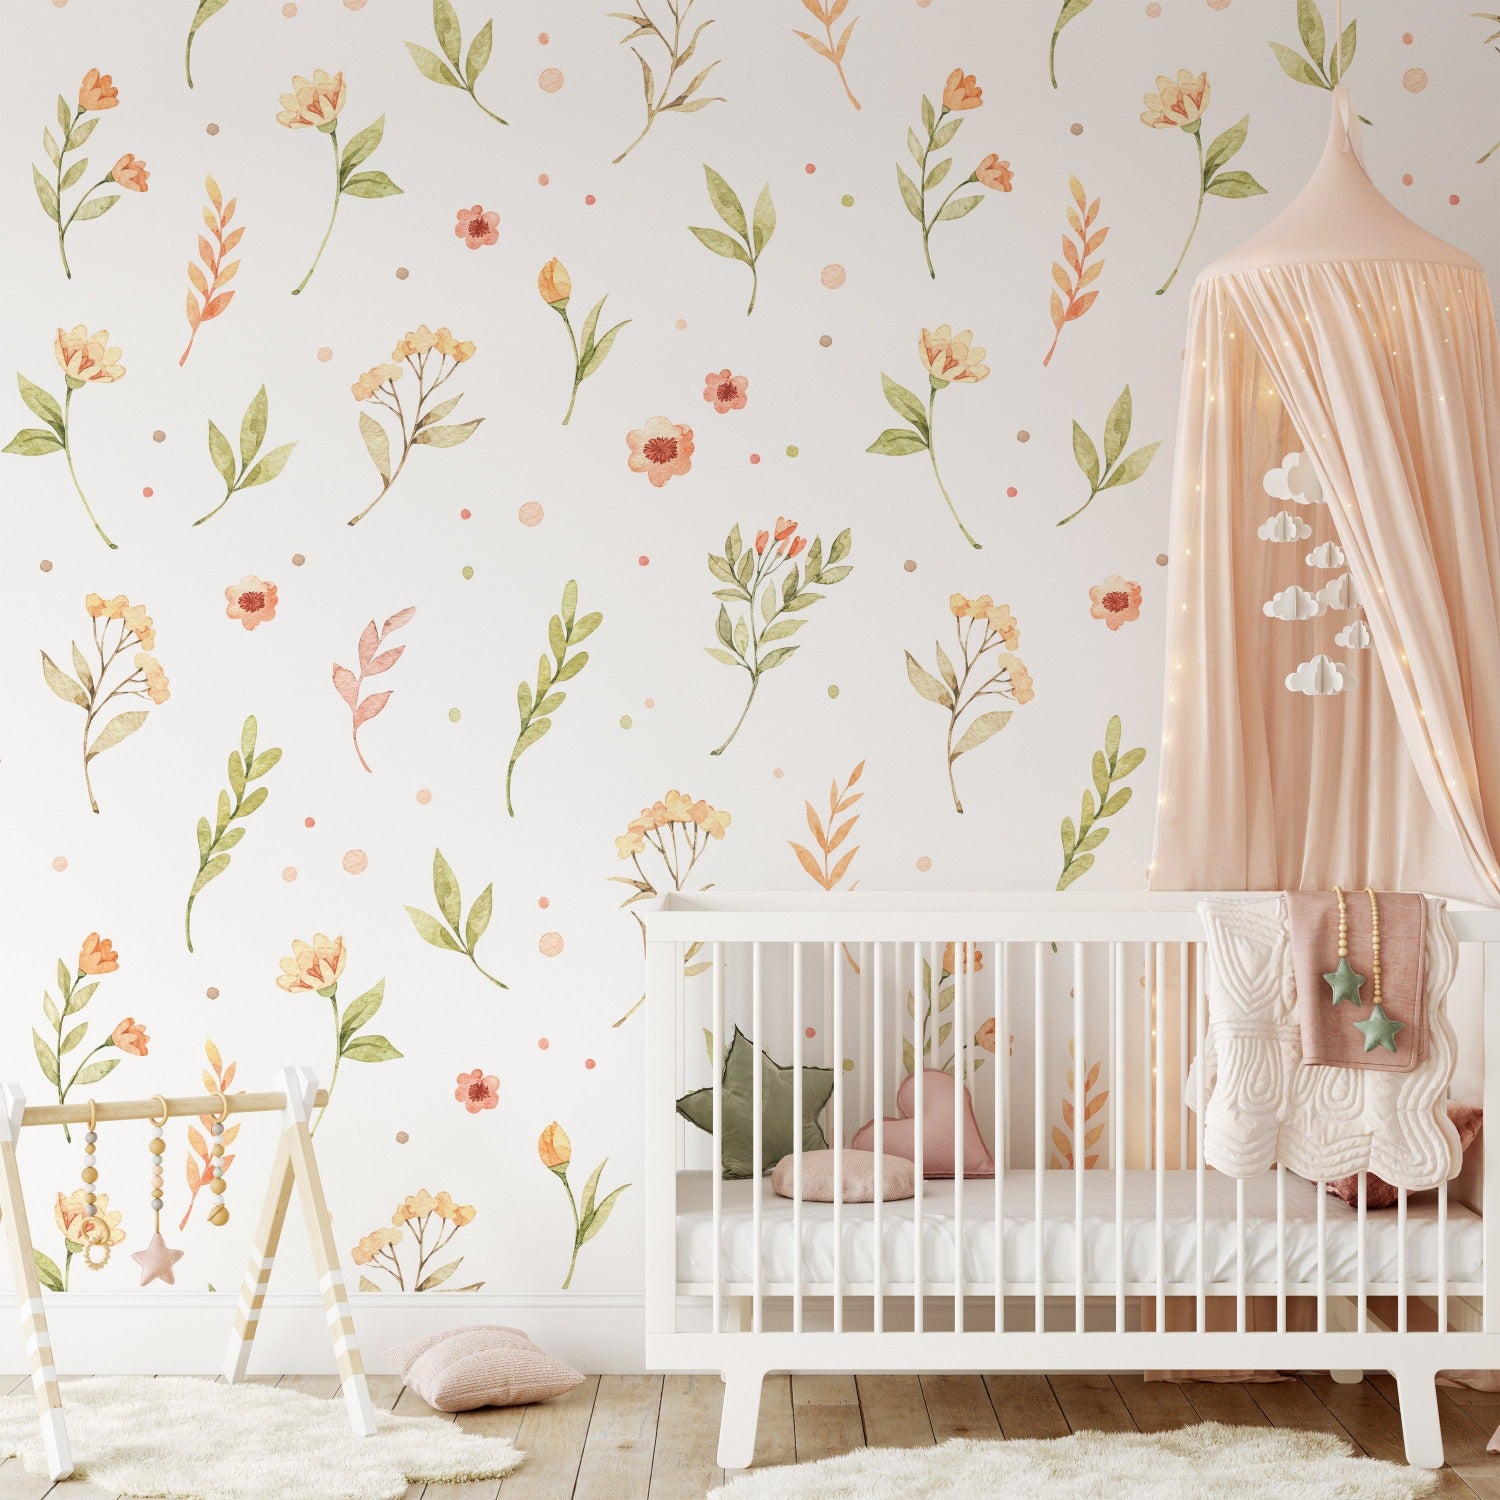 A cozy nursery room featuring the Flower and Leaf Wallpaper, which adds a playful yet gentle botanical theme with its pastel flowers and foliage, complementing the room’s warm tones and white furnishings